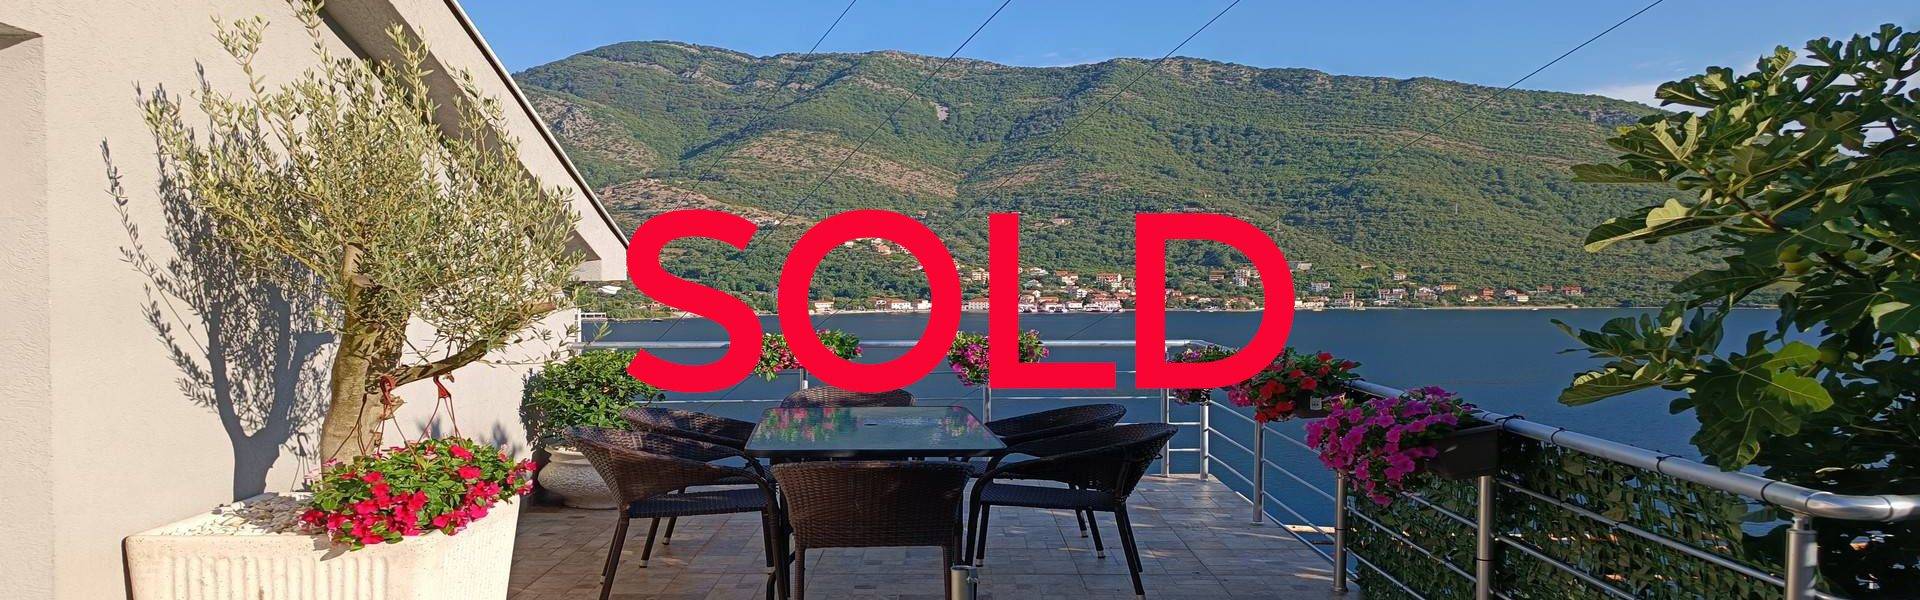 Apartment for sale in-Tivat Montengro astra real estate